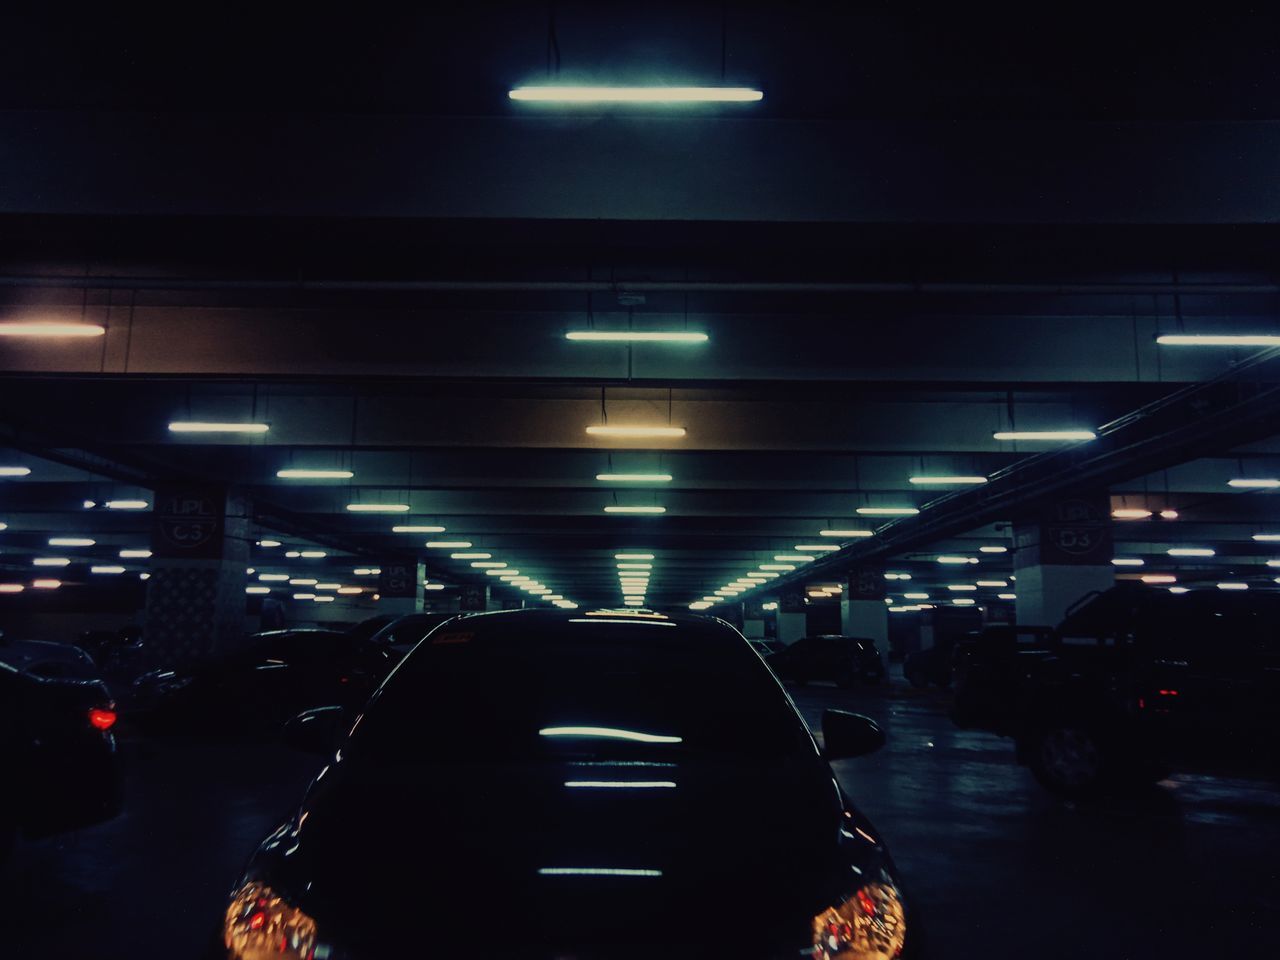 illuminated, transportation, mode of transportation, architecture, land vehicle, lighting equipment, motor vehicle, car, real people, night, indoors, incidental people, travel, built structure, city, light, in a row, sign, lifestyles, ceiling